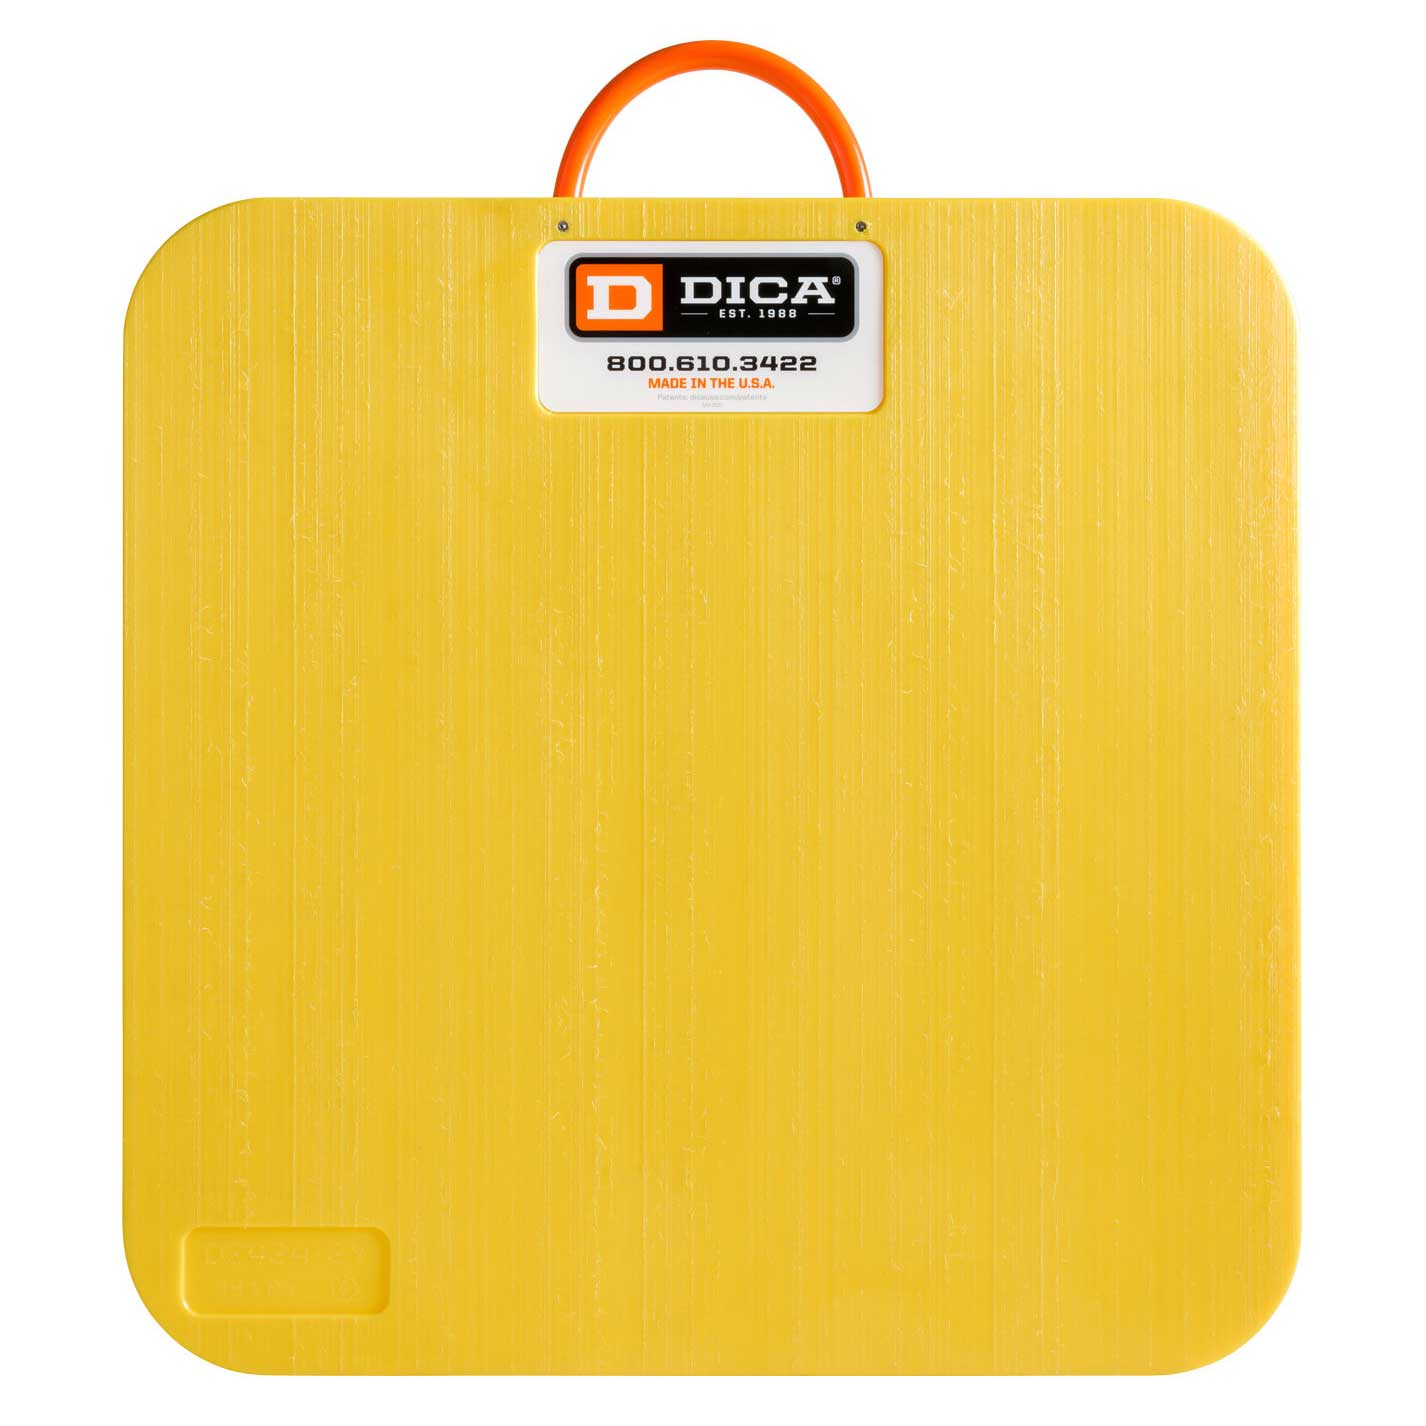 SafetyTech® 24" x 24" Outrigger Pad | Medium Duty | 1" Thick | Yellow